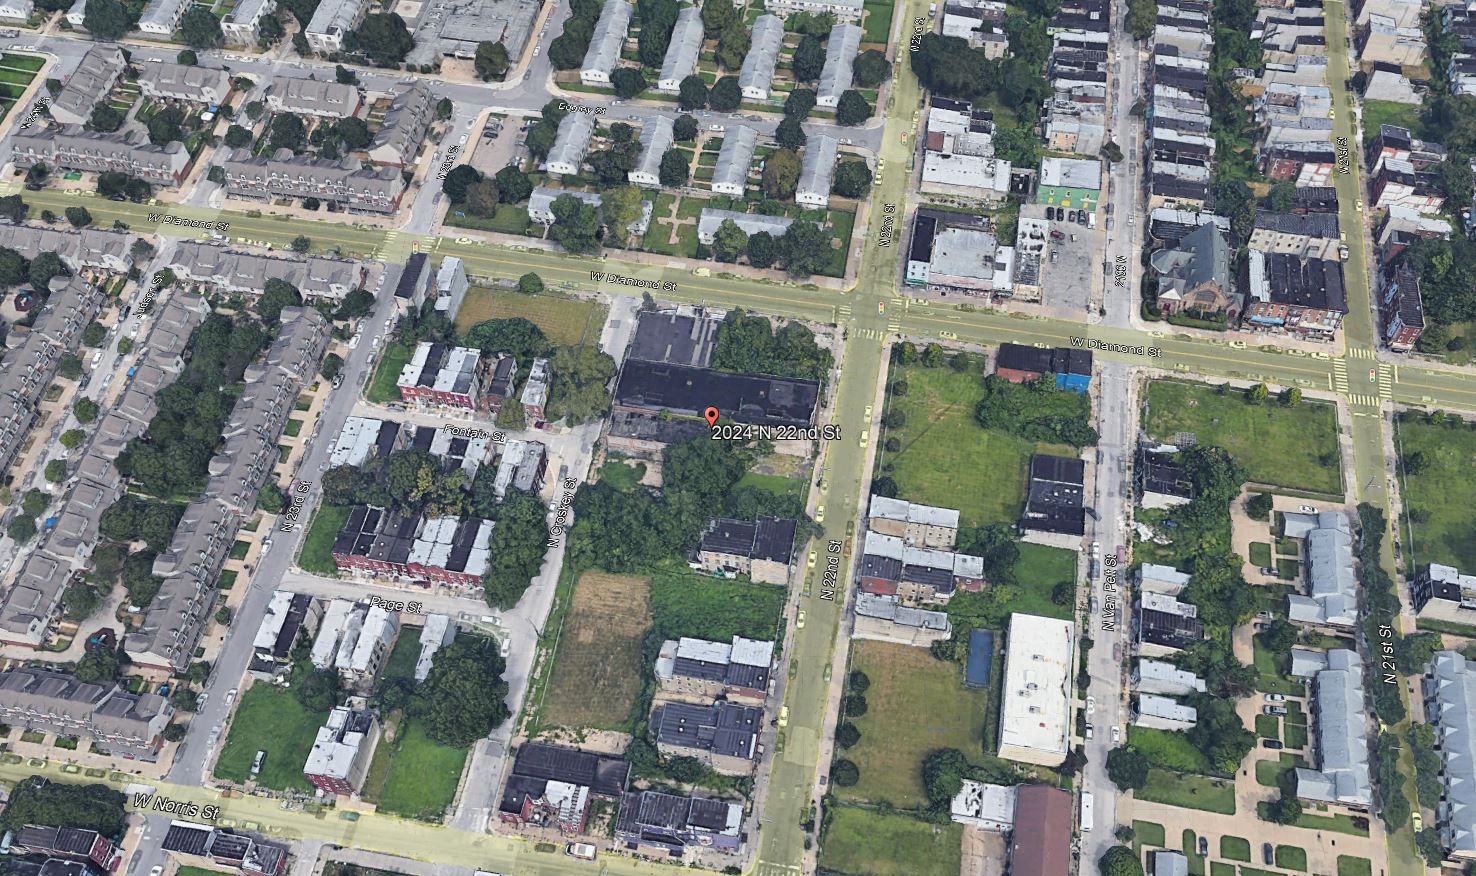 2024-28 North 22nd Street. Location map / aerial view. Credit: Oombra Architects via the Civic Design Review